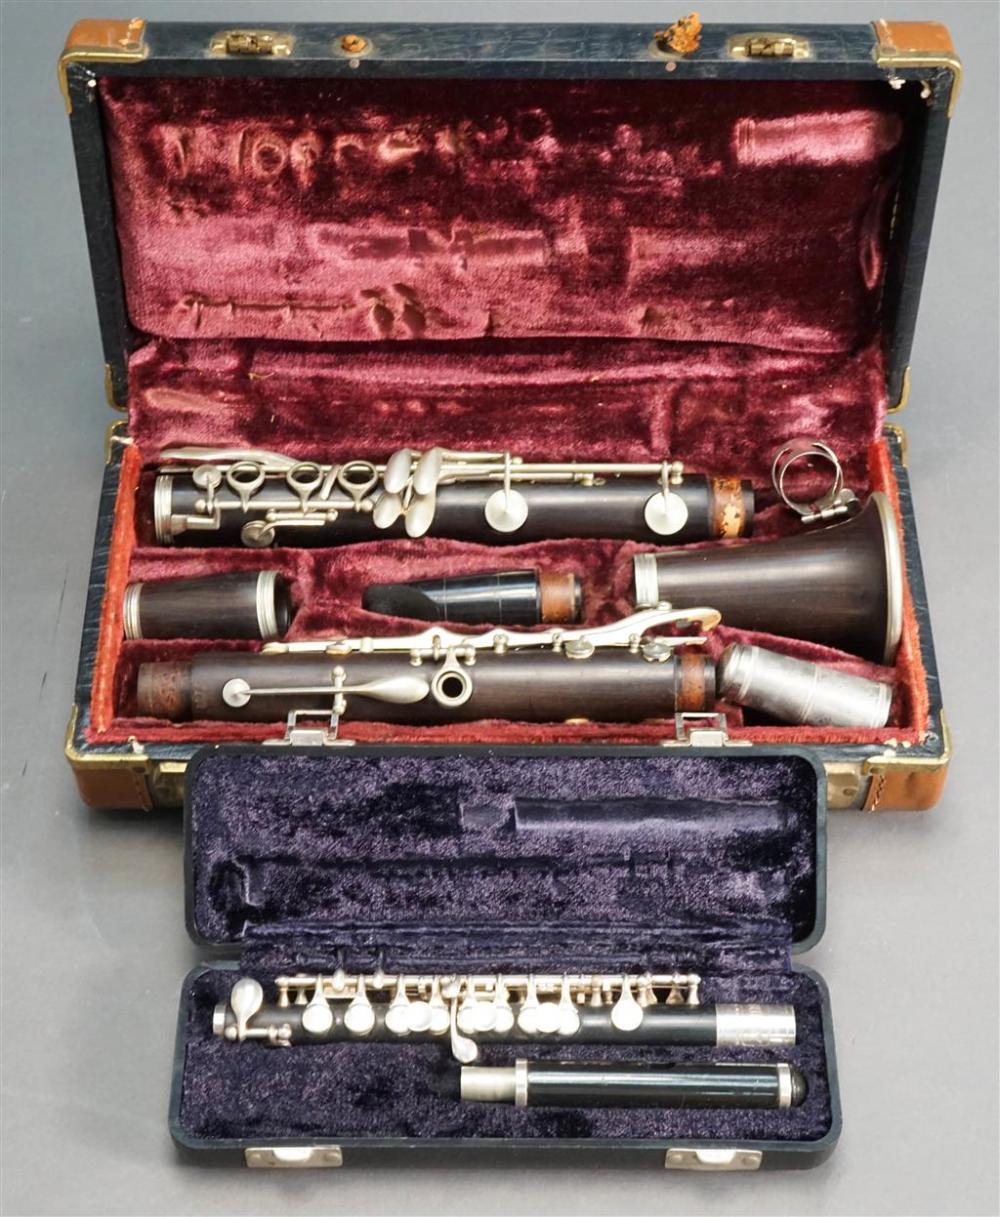 CLARINET AND PICCOLO, EACH WITH